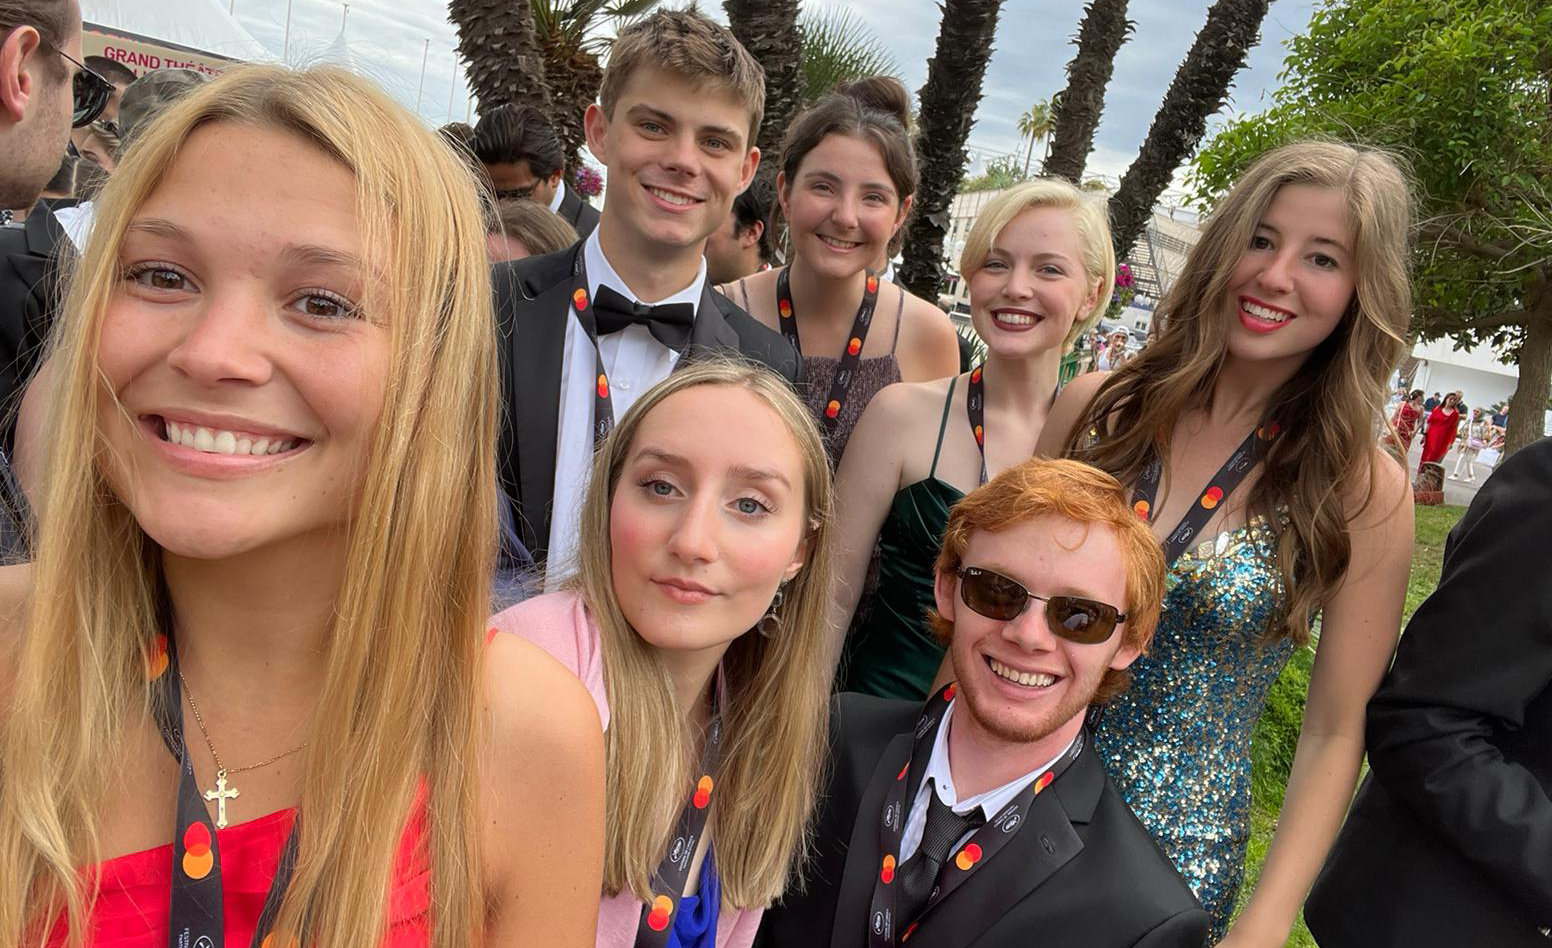 UM students (front, from left) Henri Long, Grace Azordegan and Bryce Barrett and (back, from left) Cooper Carrico, Megan Hughes, Miranda Tate and Morgan Whited wait for the premiere of ‘Indiana Jones and the Dial of Destiny’ at the Cannes Film Festival. Submitted photo